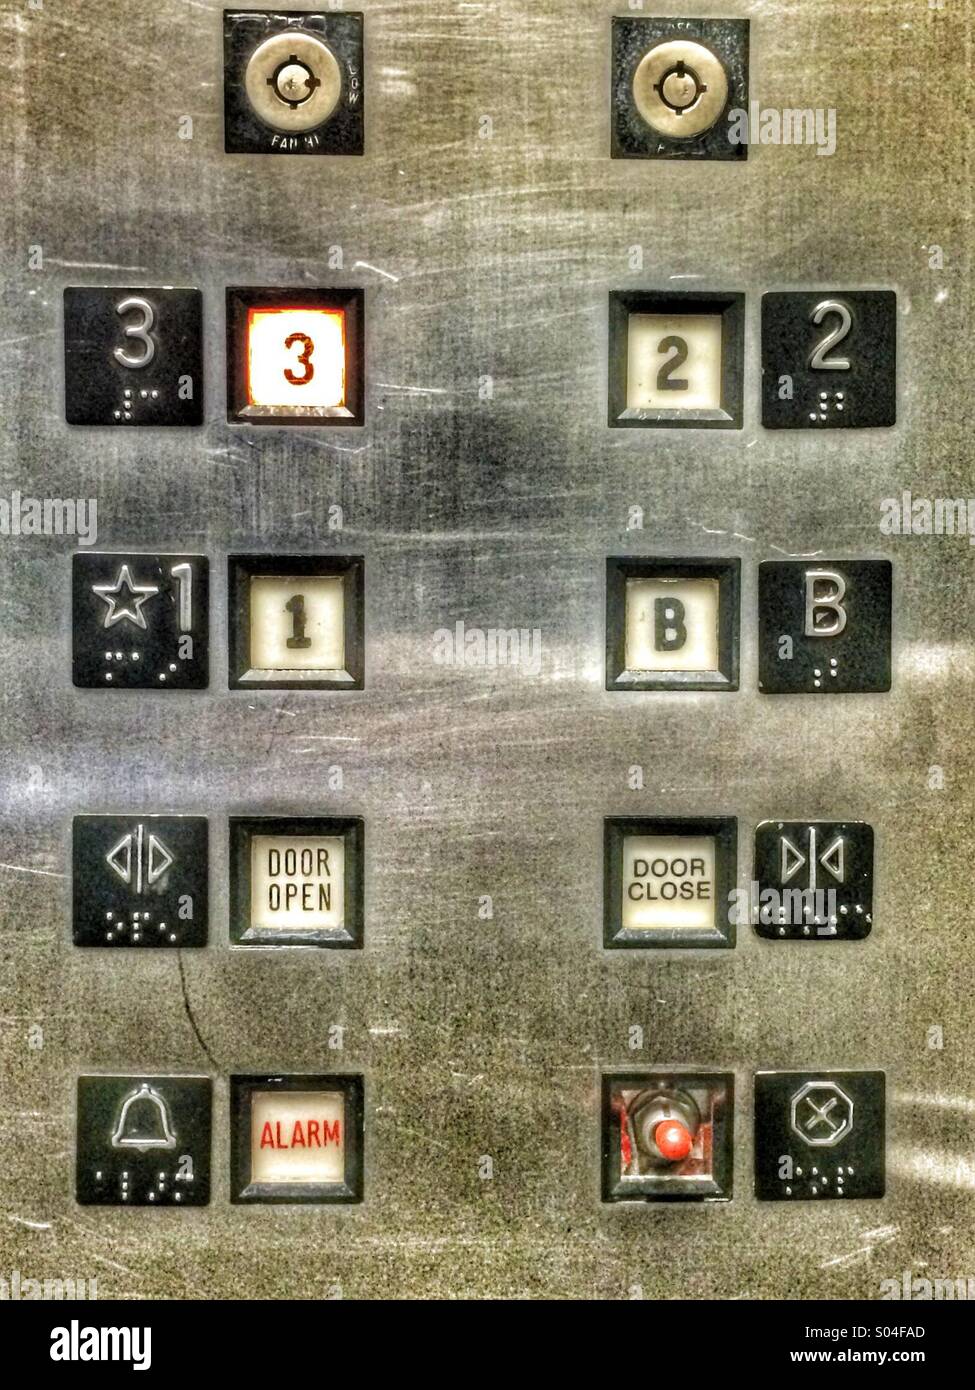 Button plate in an elevator with three floors Stock Photo